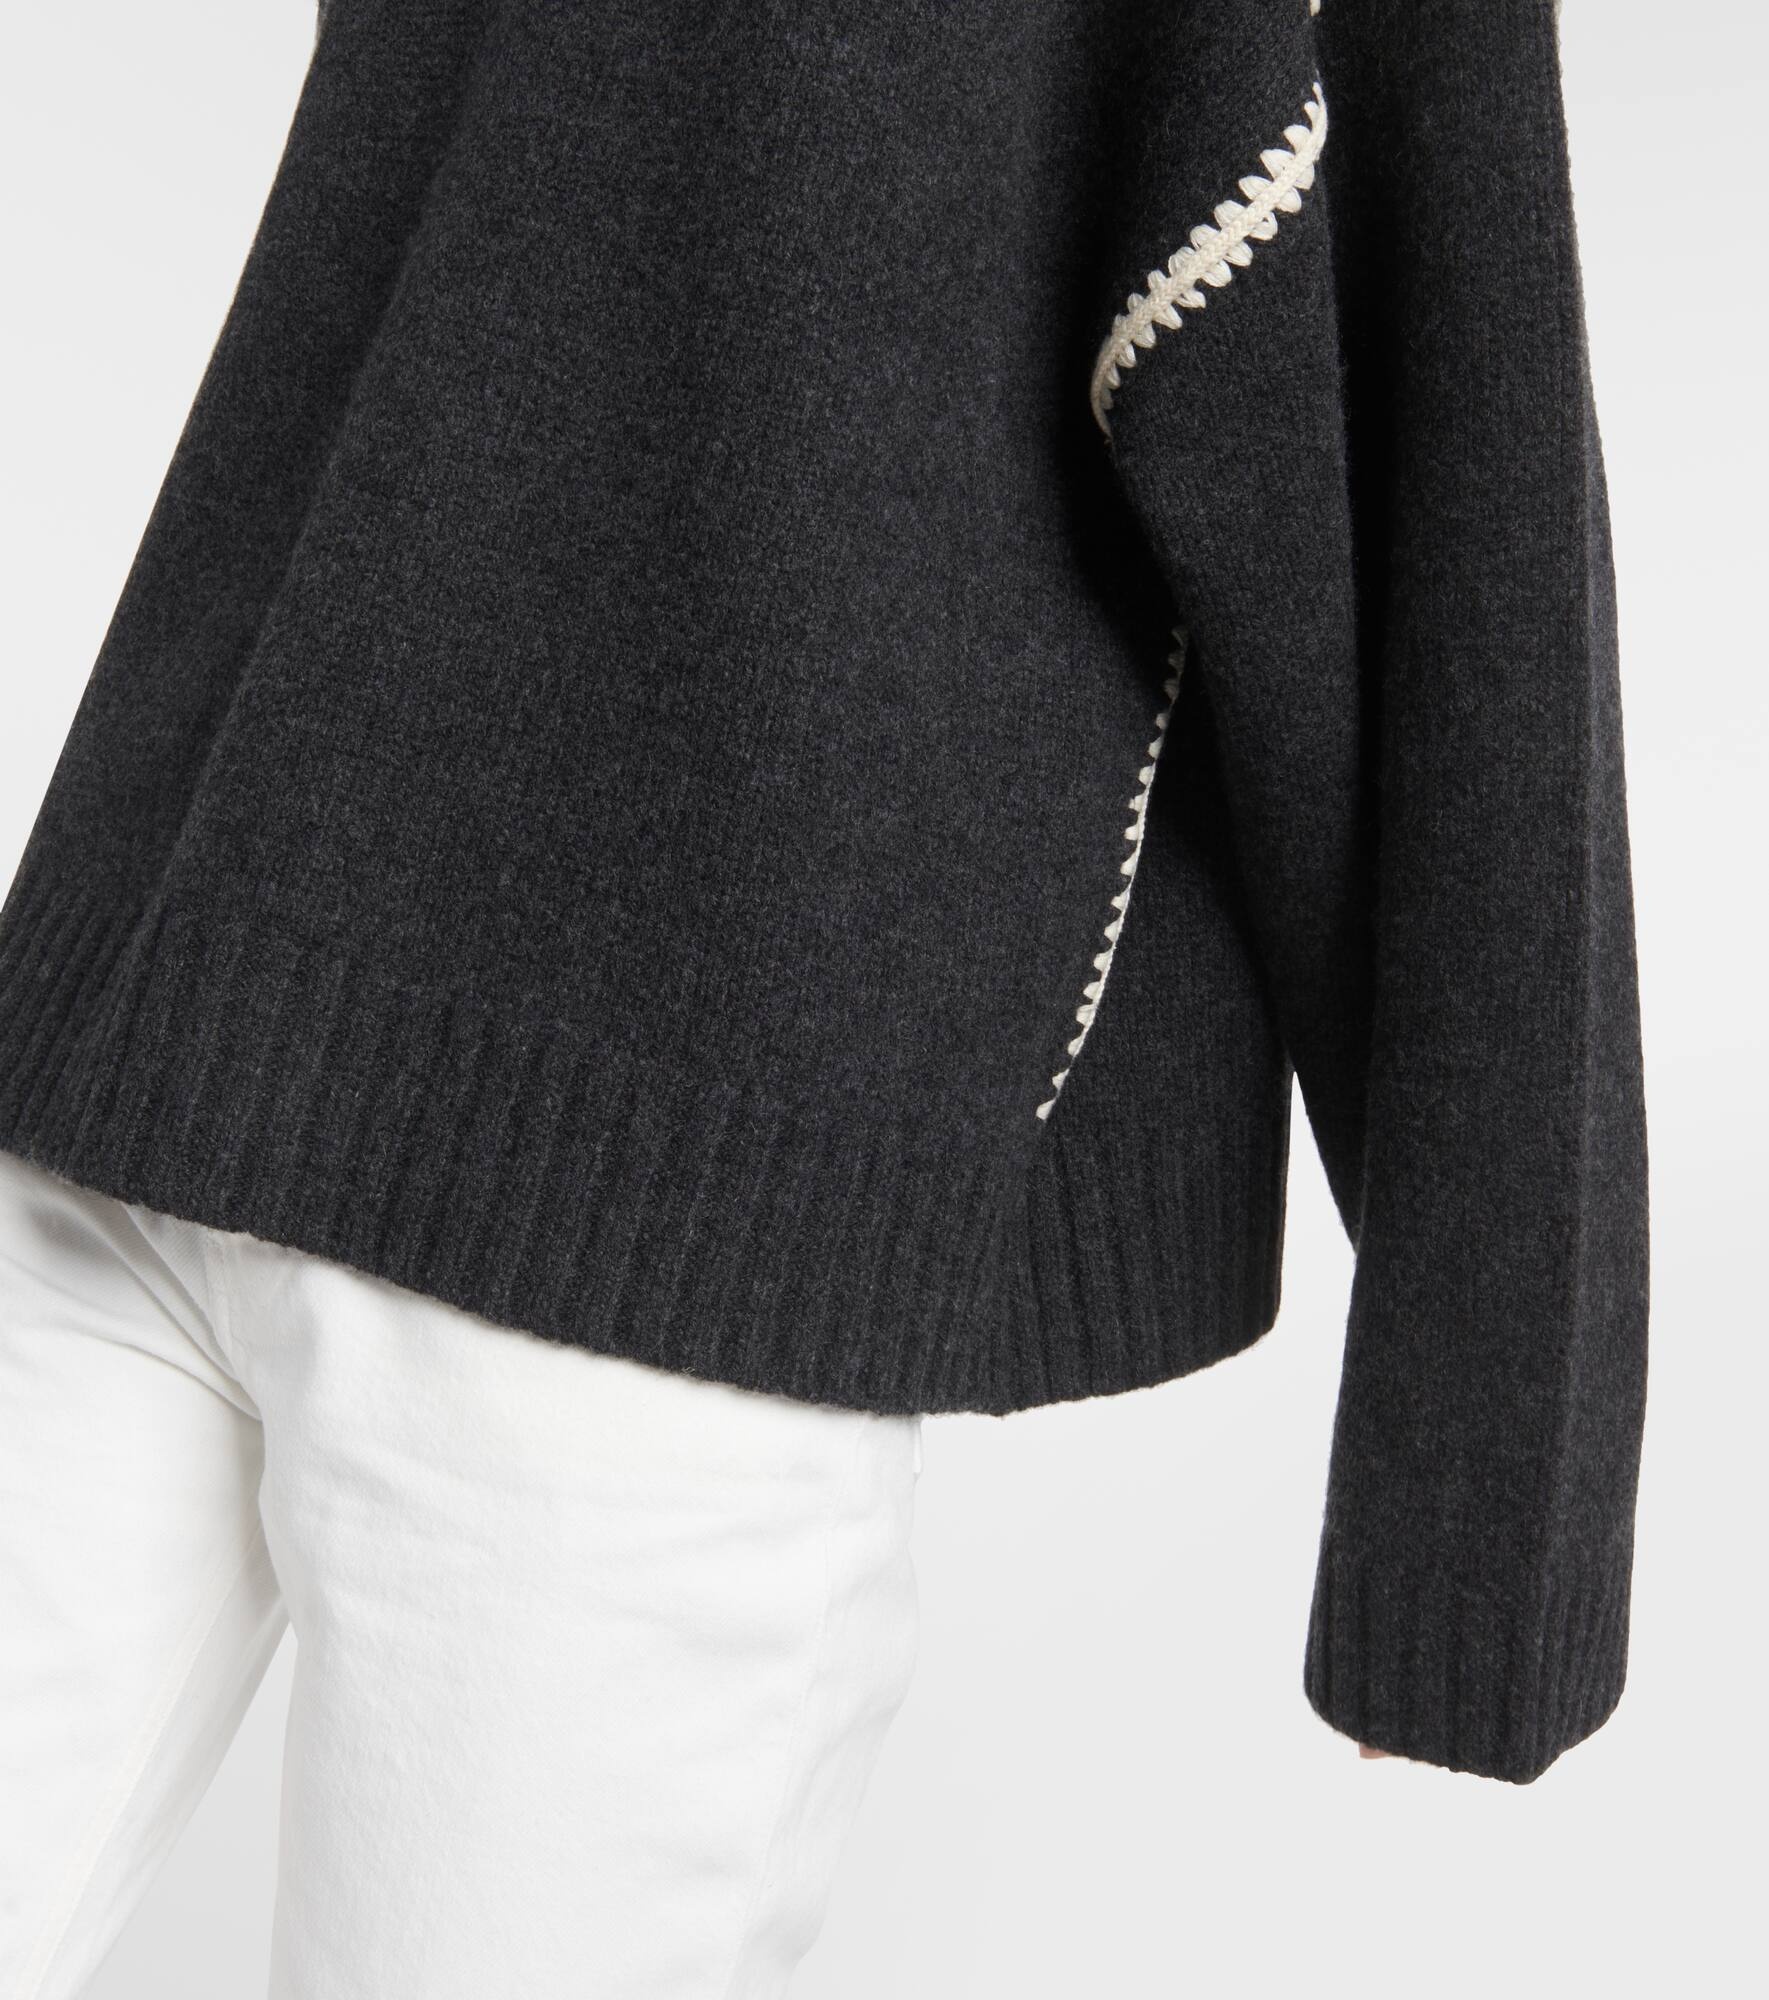 Embroidered wool and cashmere sweater - 5